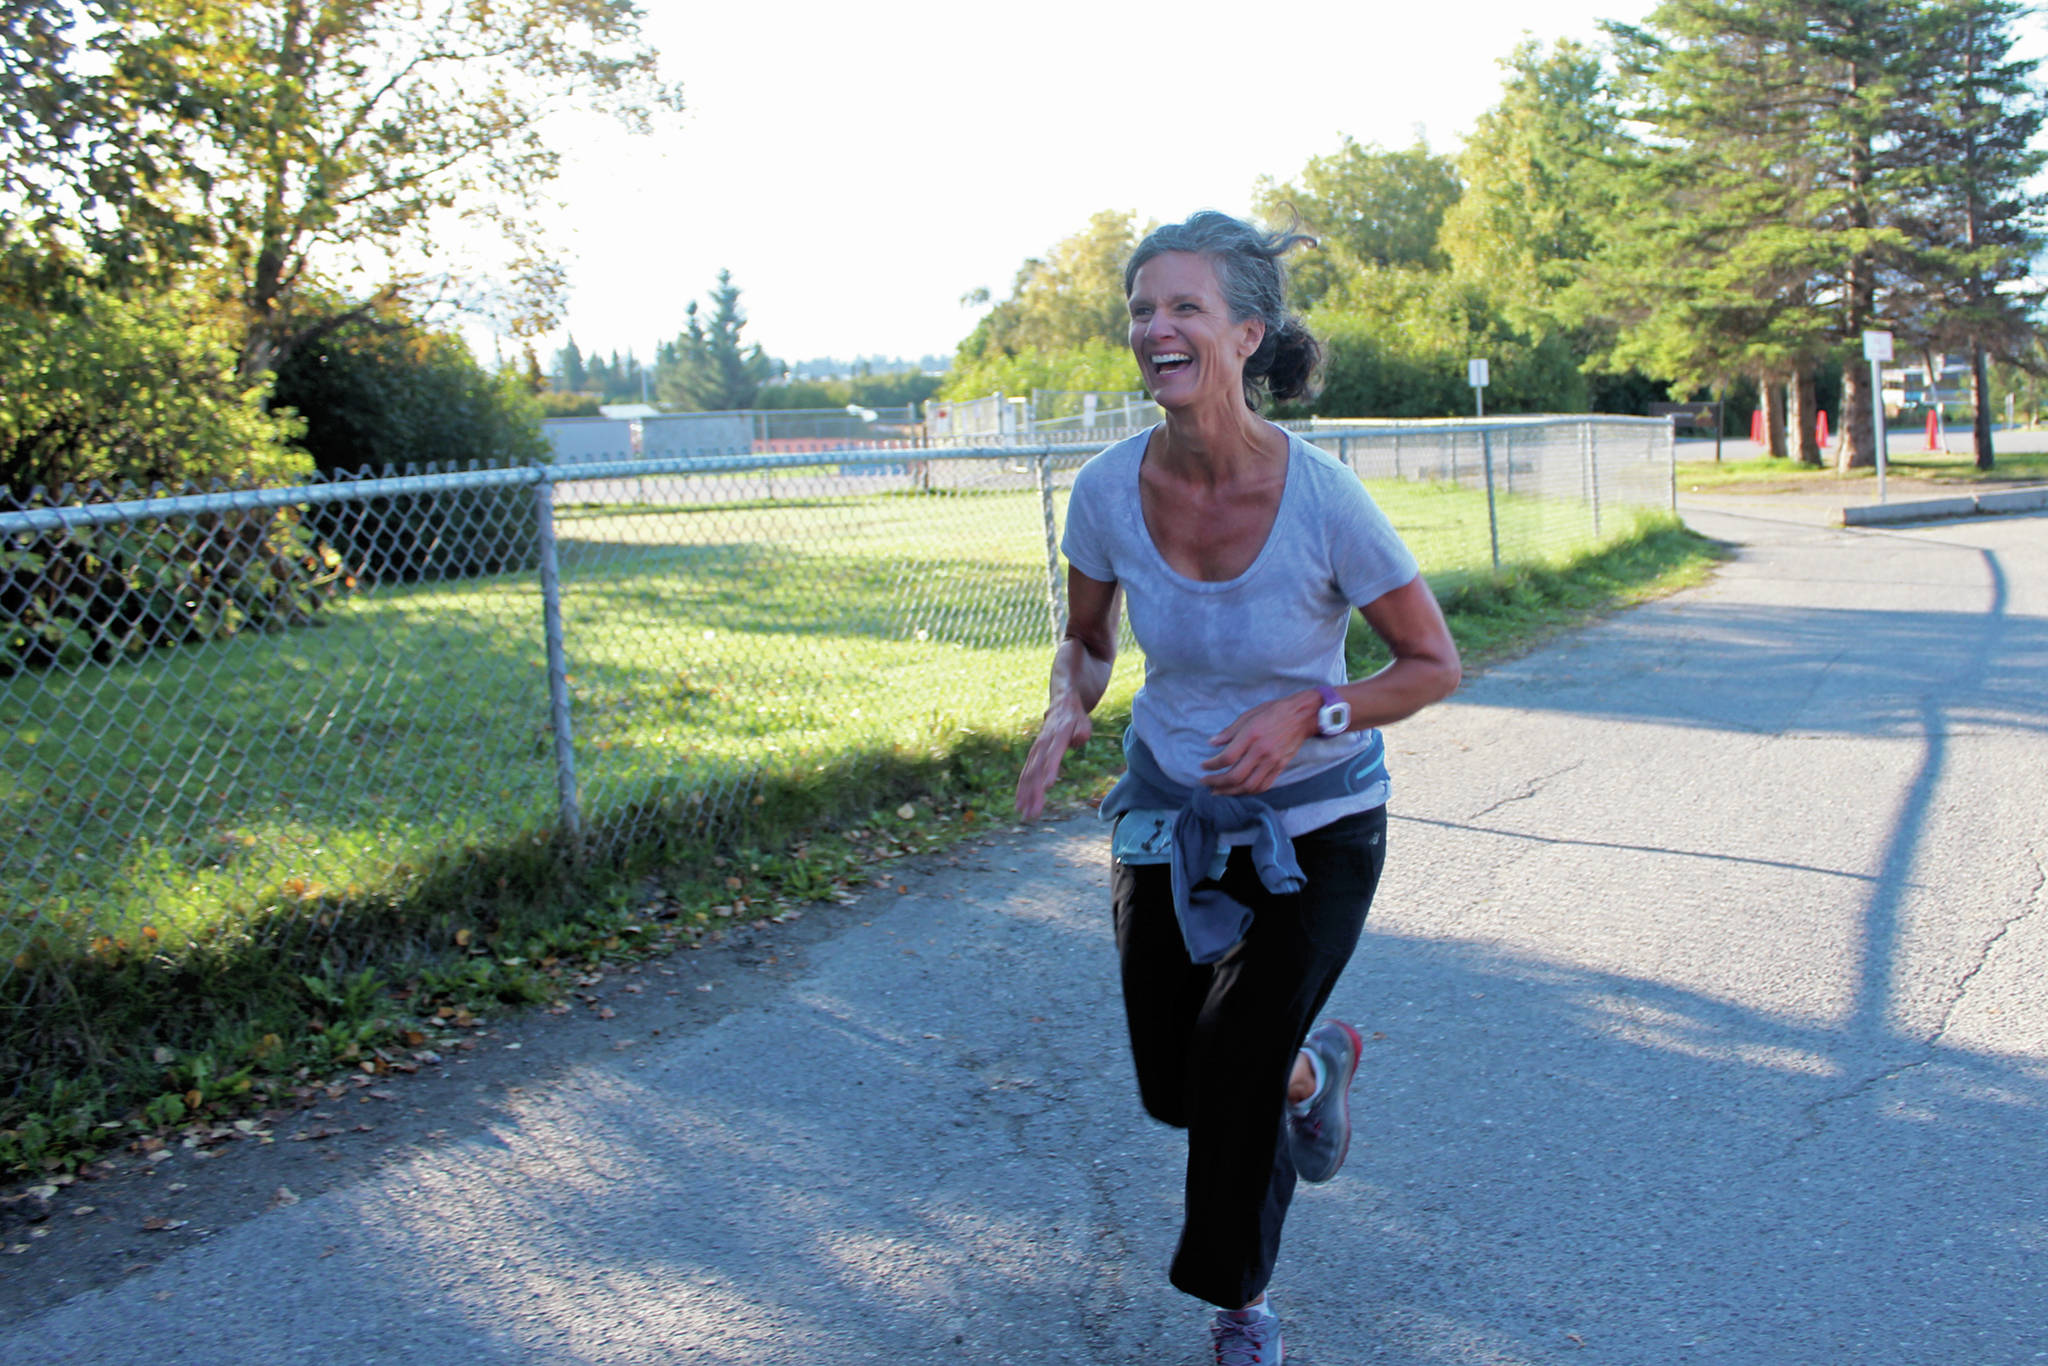 Saundra Choate-Hudson completes the running leg of the Mariner Triathlon for her team Saturday.